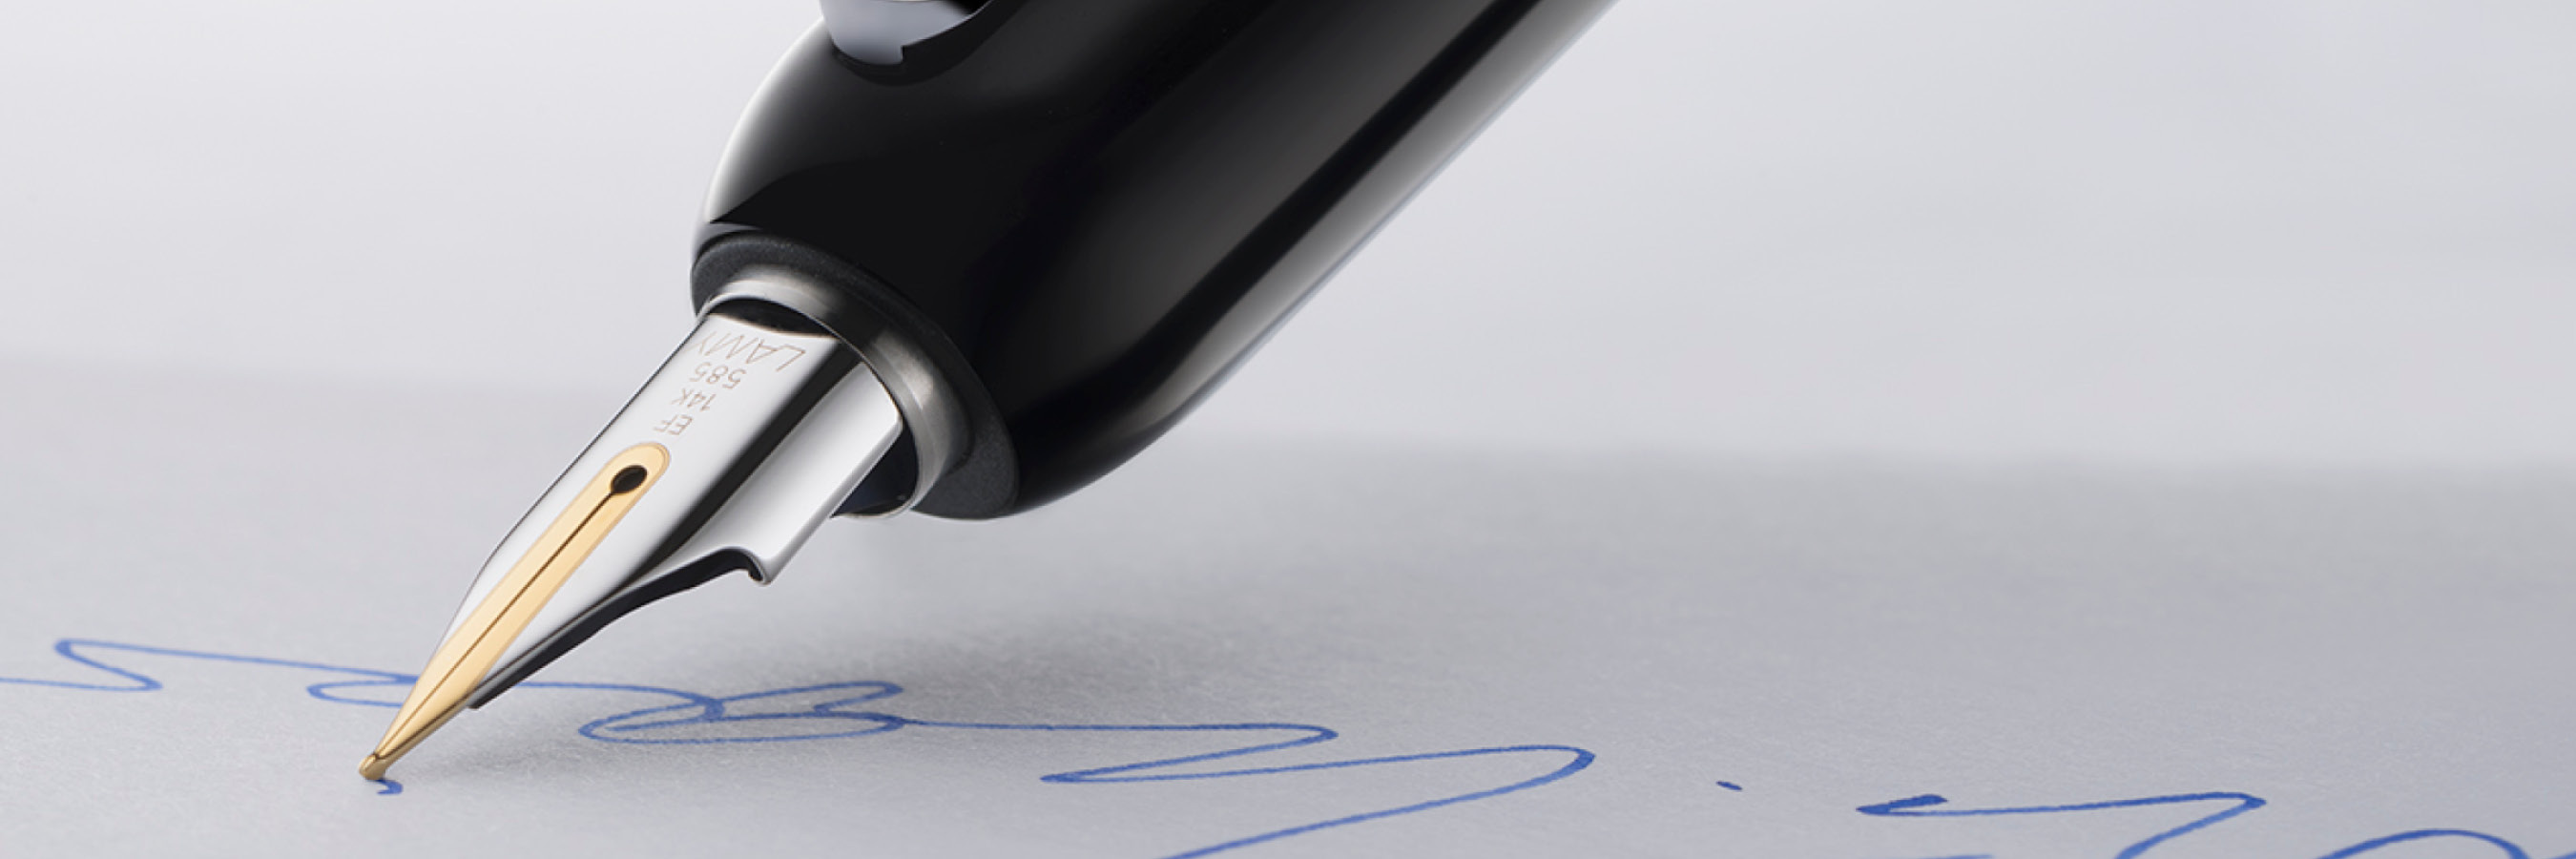 How to clean a fountain pen